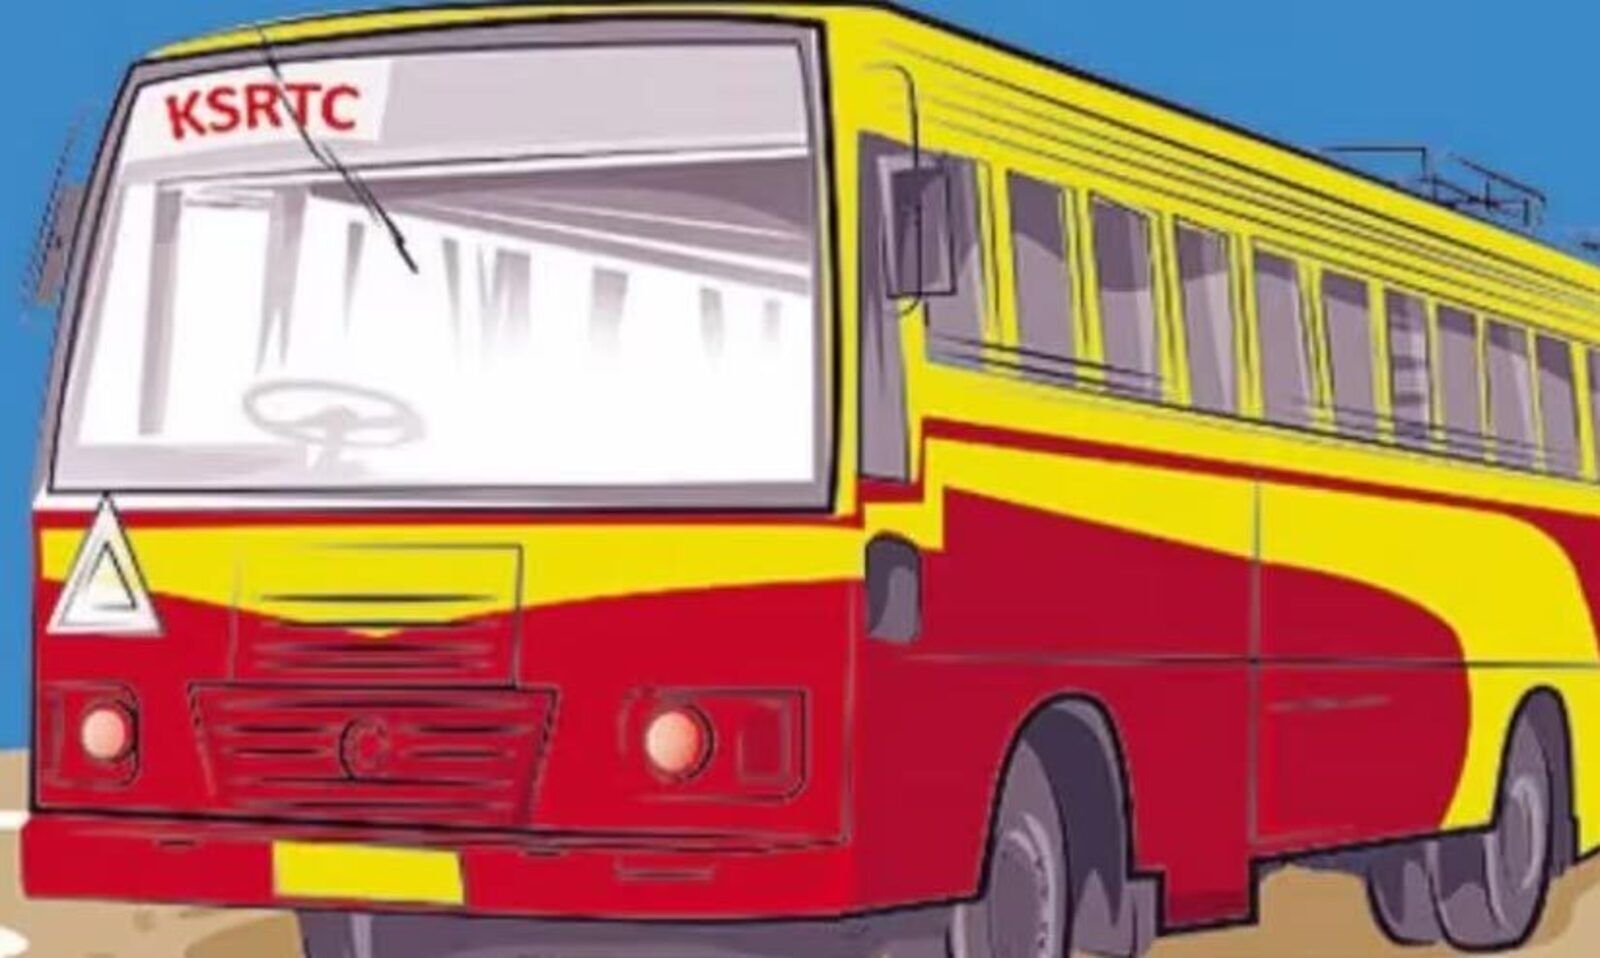 KSRTC services increase on paper, but total distance covered, revenue dip